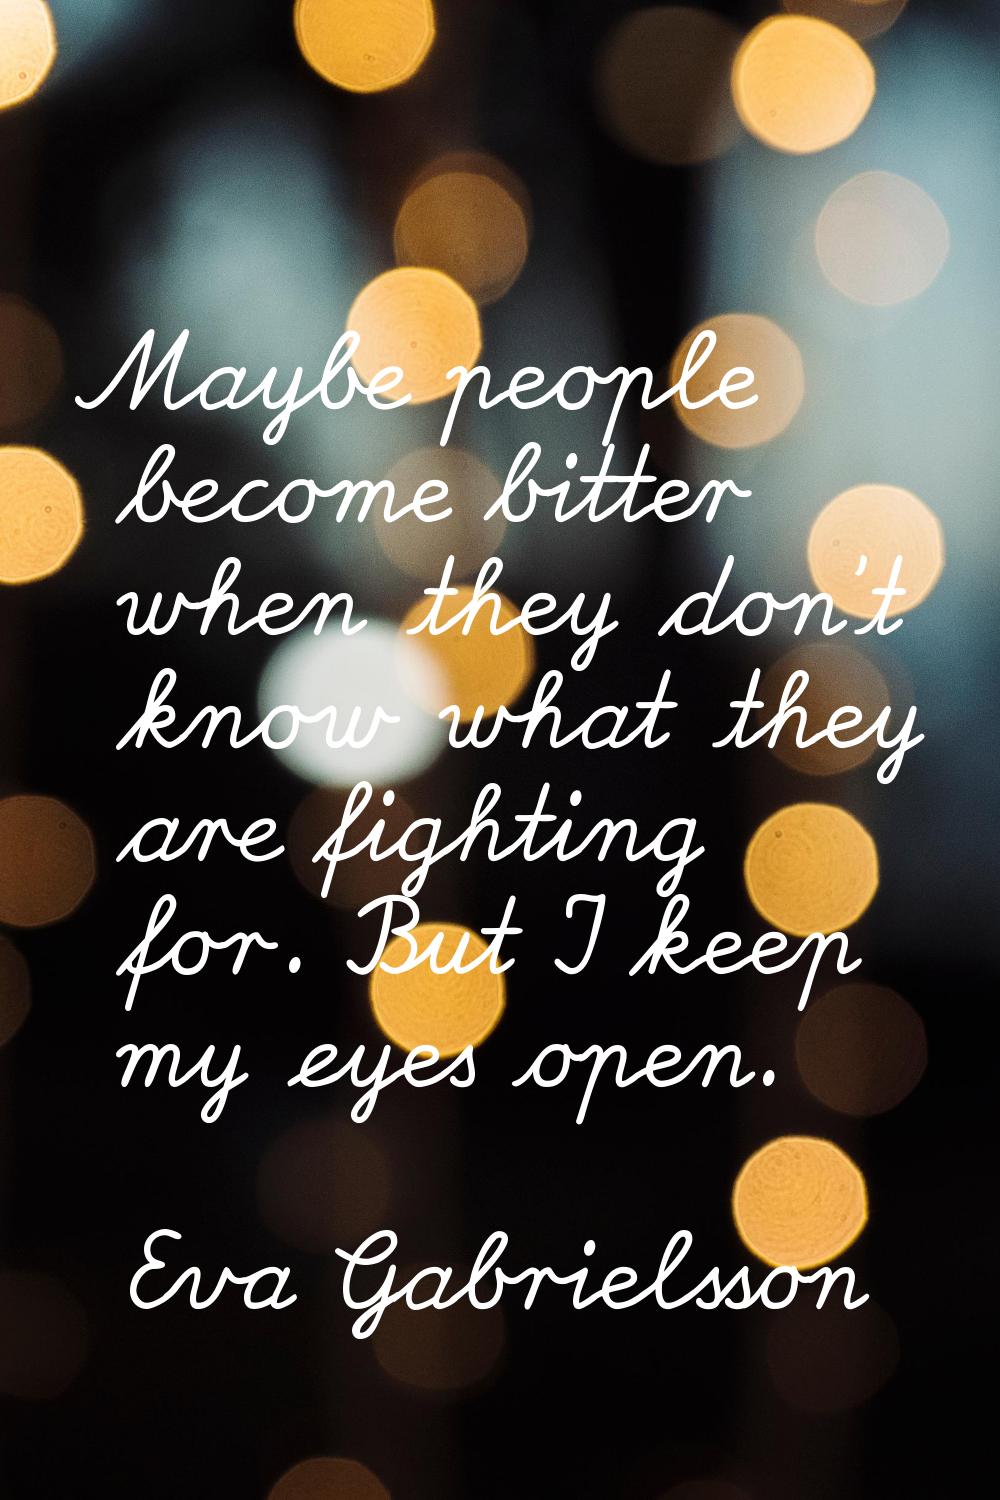 Maybe people become bitter when they don't know what they are fighting for. But I keep my eyes open